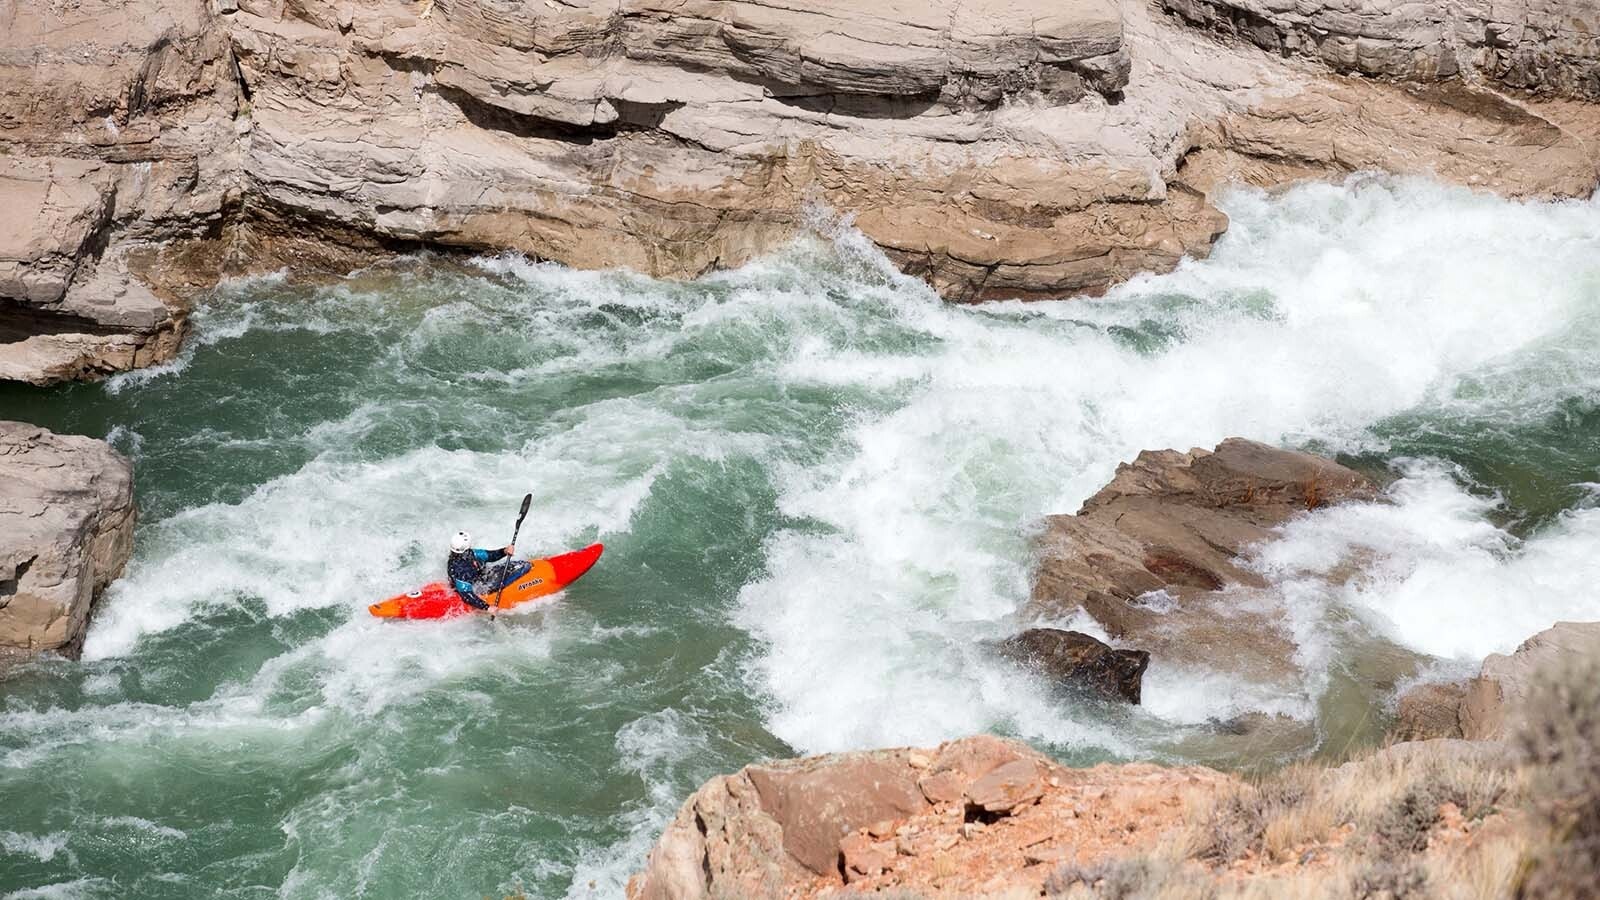 Exert kayaker Kevin Kennedy of Cody is pictured here running the “Iron Curtain” rapids on the Shoshone River when it was running at about 2,500 cubic feet per second (cfs). It was flowing at 4,500 cfs on Sunday, when three tourists tried running it in a cheap inflatable raft, which flipped.